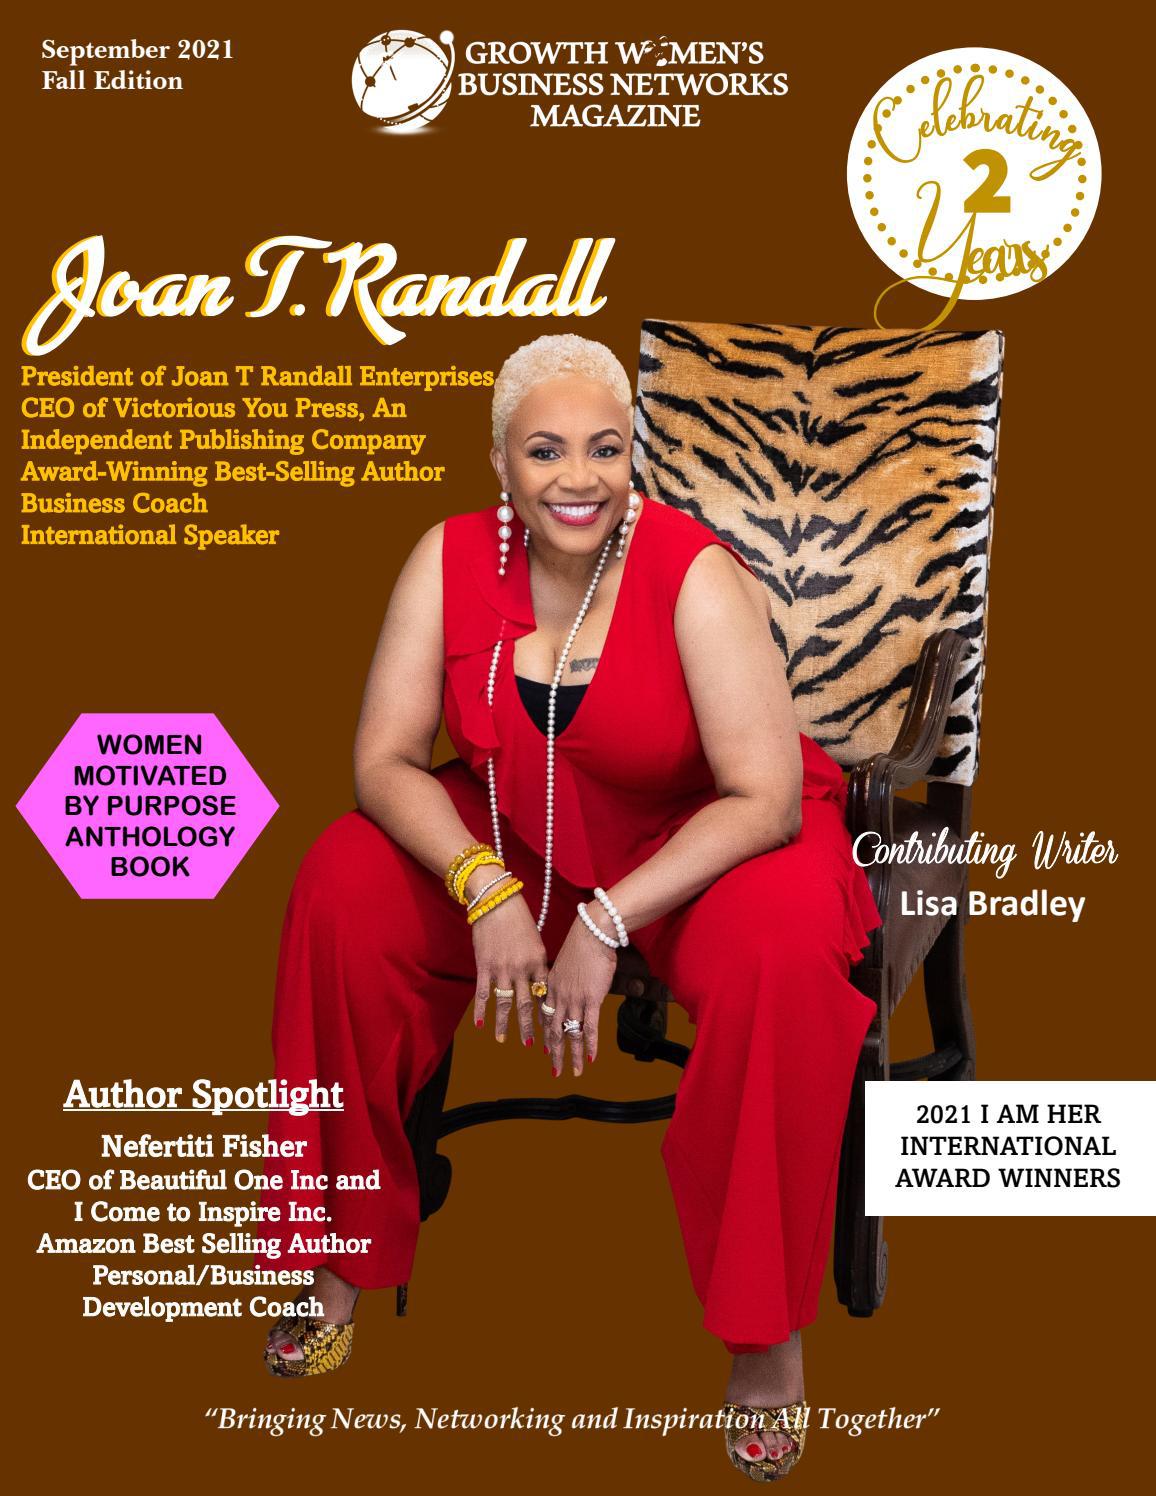 Growth Women's Business Networks Magazine September 2021 Fall Edition